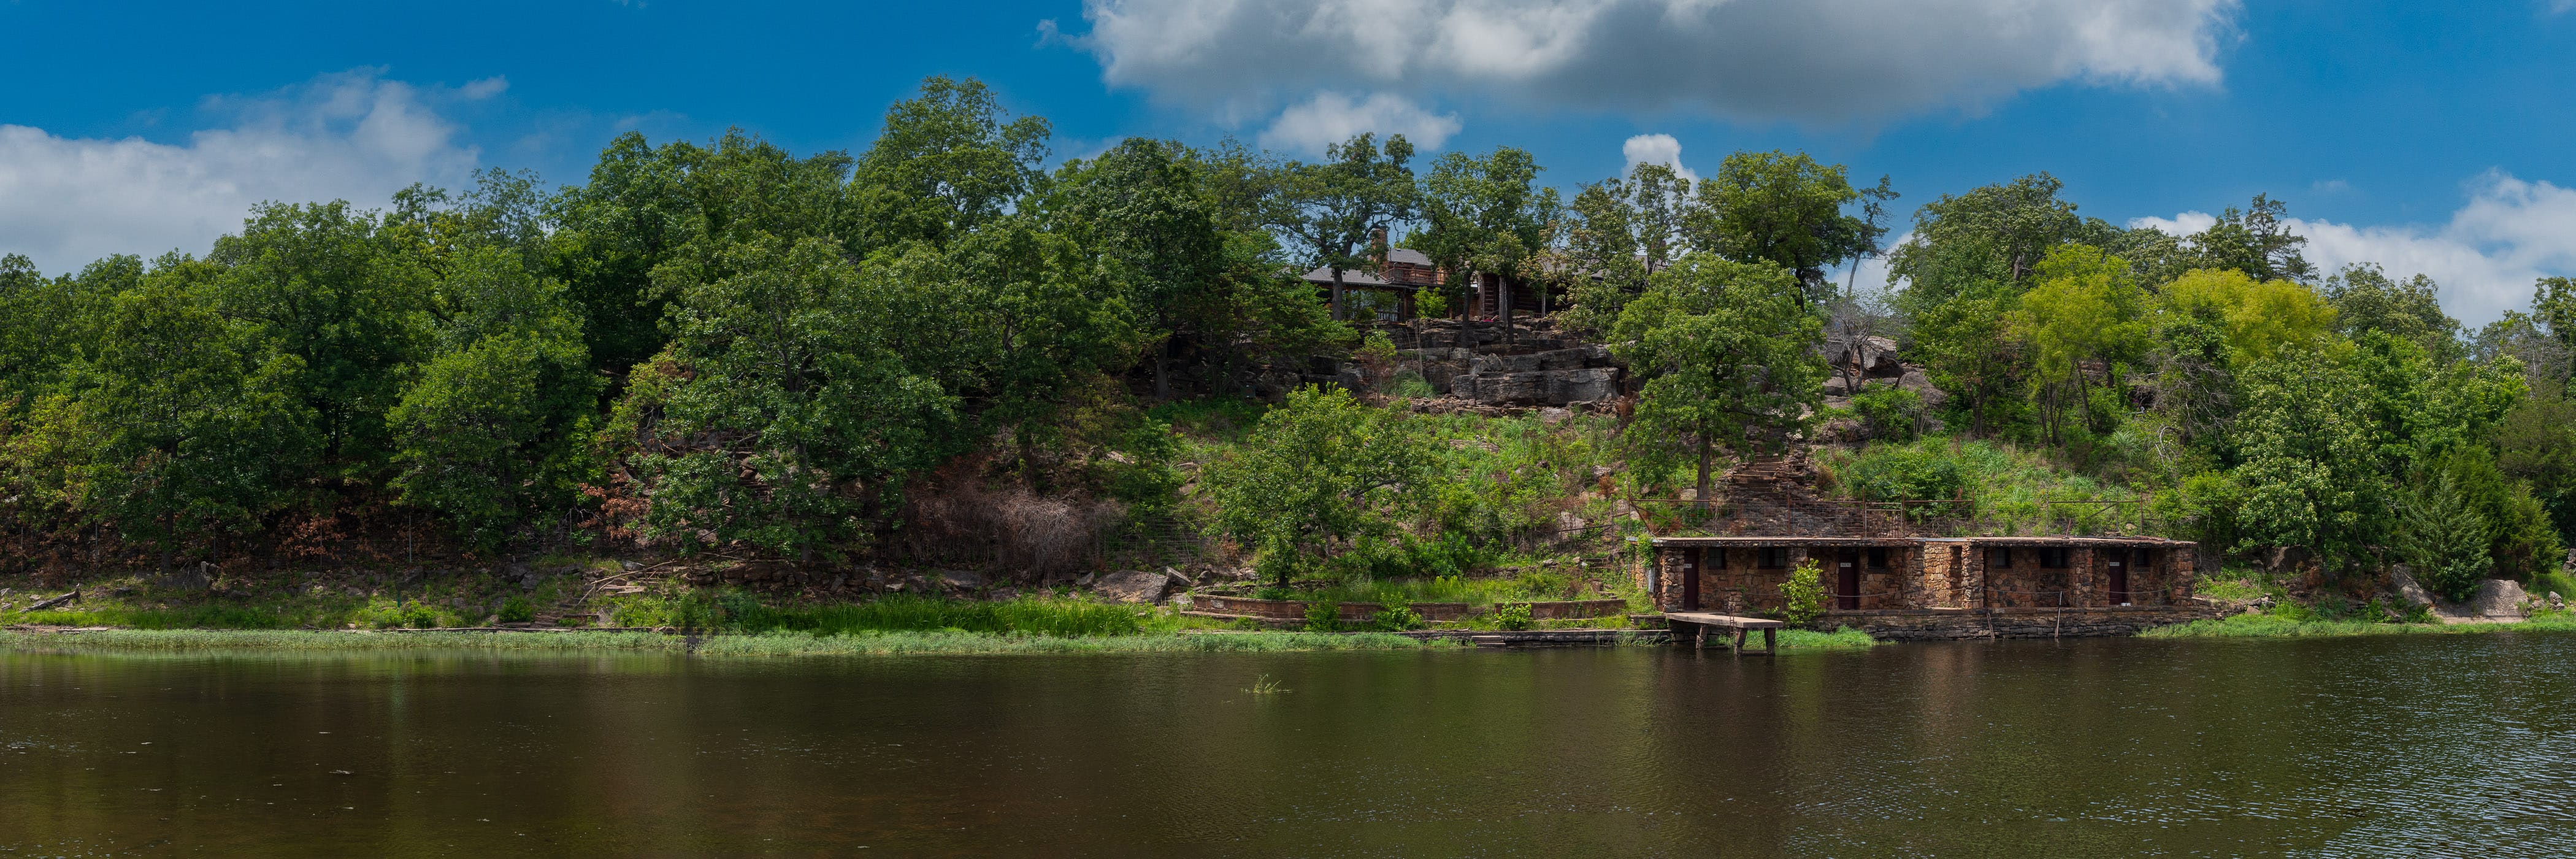 A panoramic view of the boathouse and hunting lodge at Woolaroc, the former ranch retreat of Frank Phillips—the founder of Phillips Petroleum—near Bartlesville, Oklahoma. (Click the photo to view a larger version)